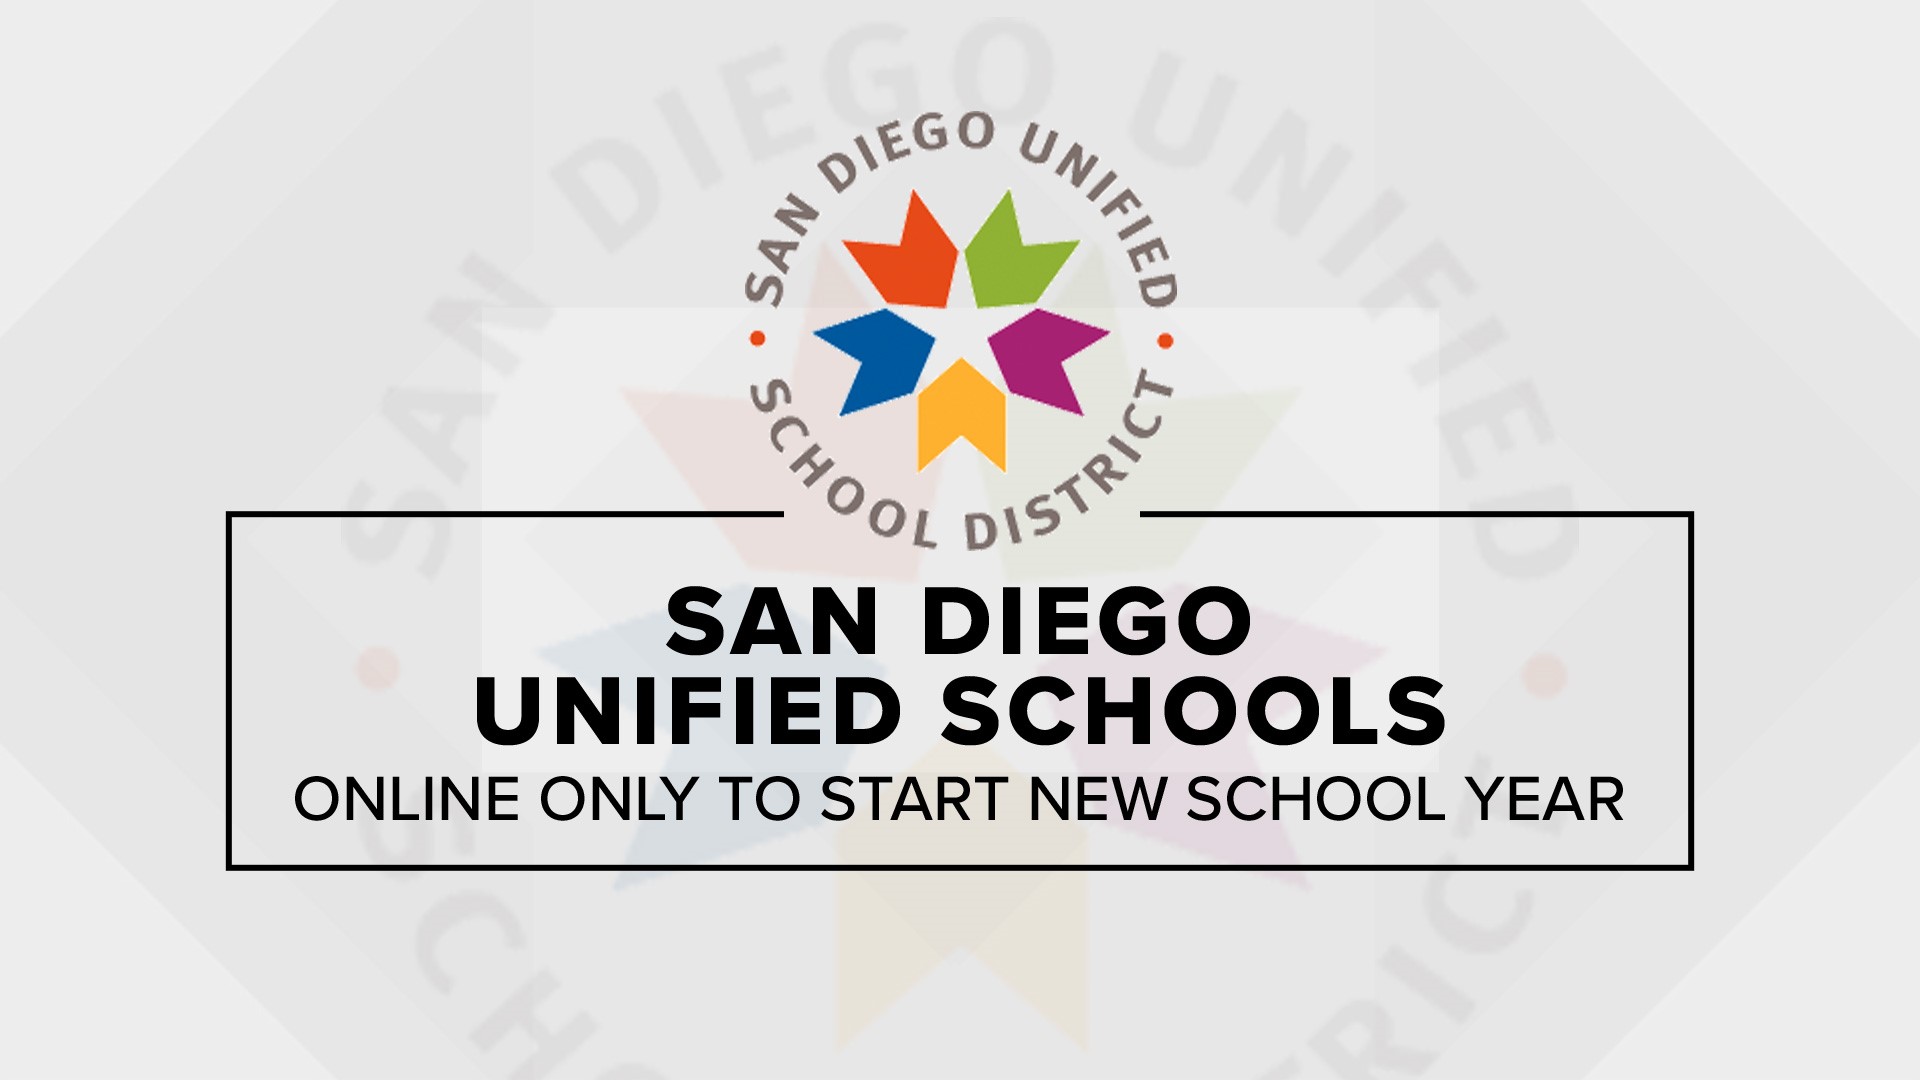 The school district announced the decision on Monday in a joint statement with Los Angeles Unified school district.